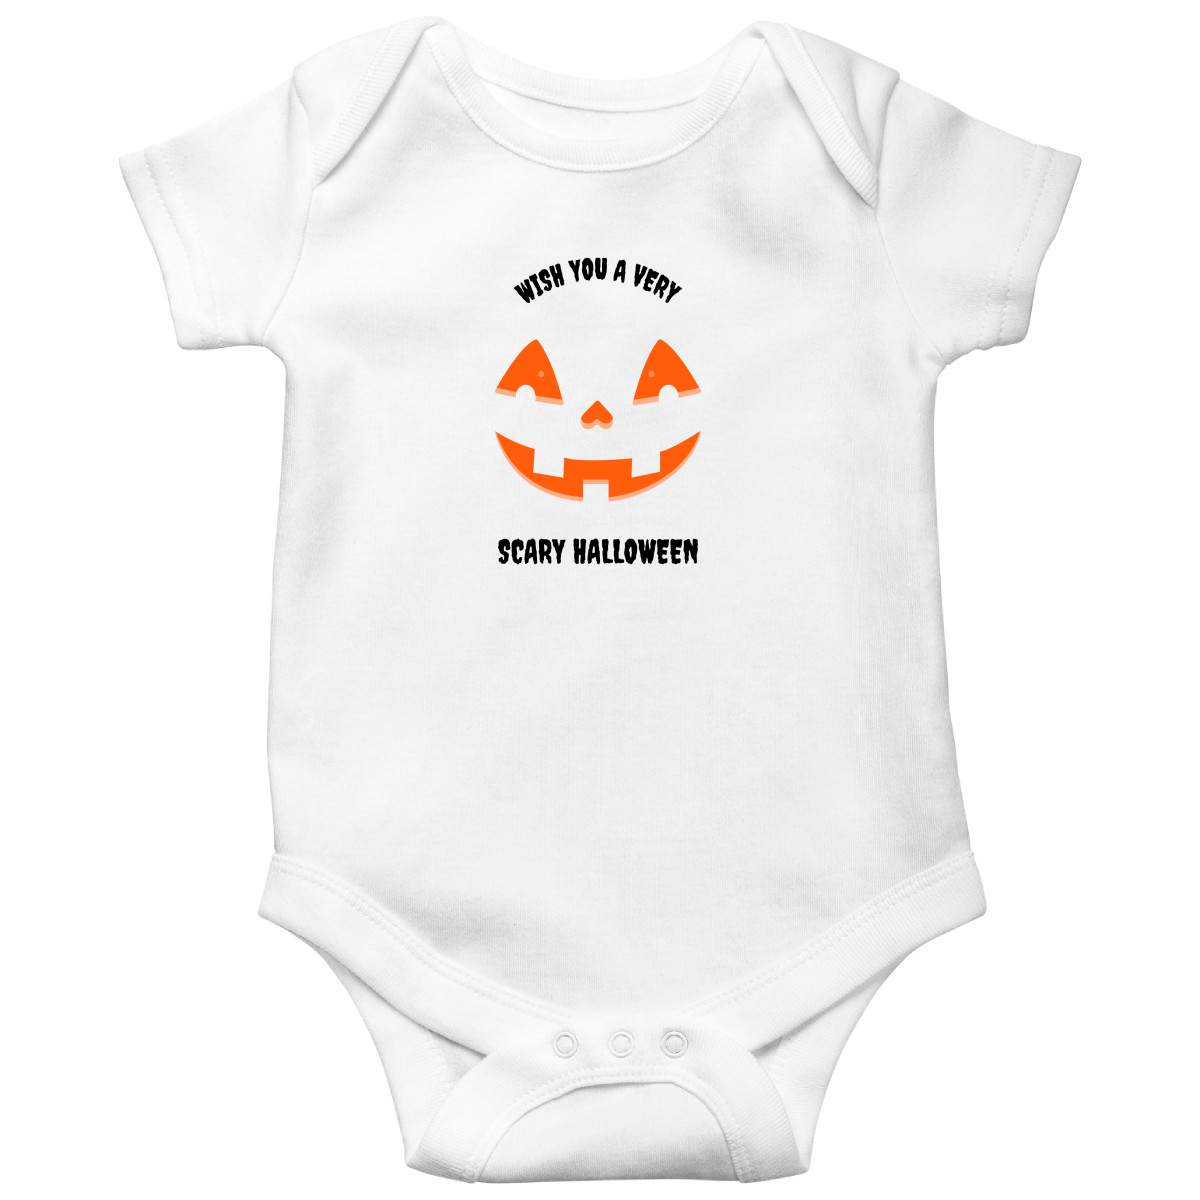 Wish You a Very Scary Halloween Baby Bodysuits | White